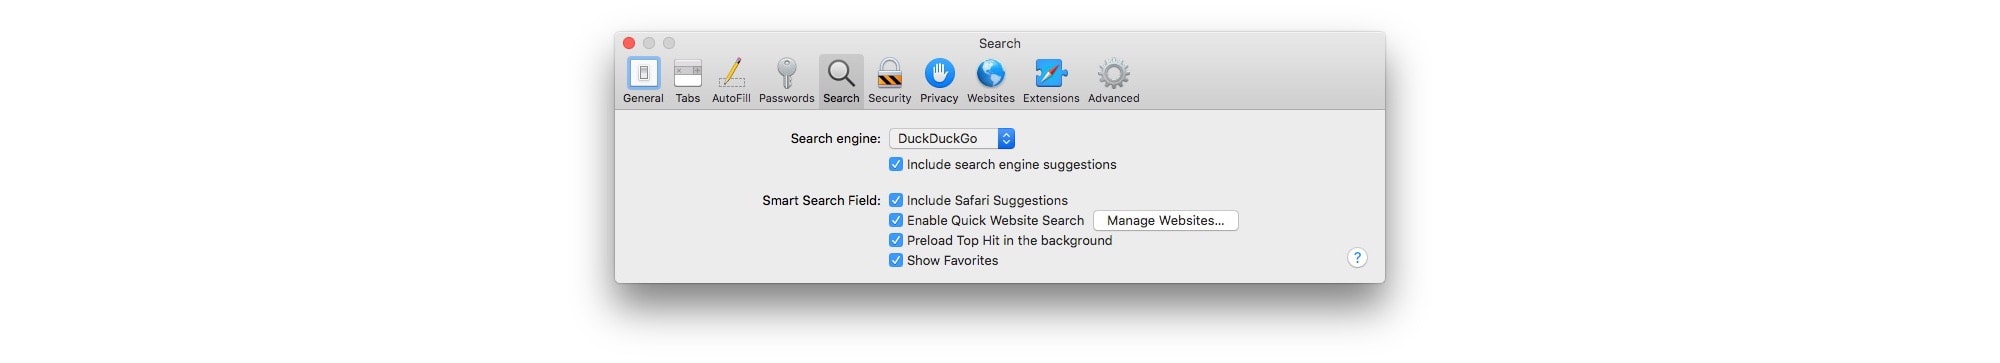 Here's where you can set DuckDuckGo as your default search engine for Safari on Mac.